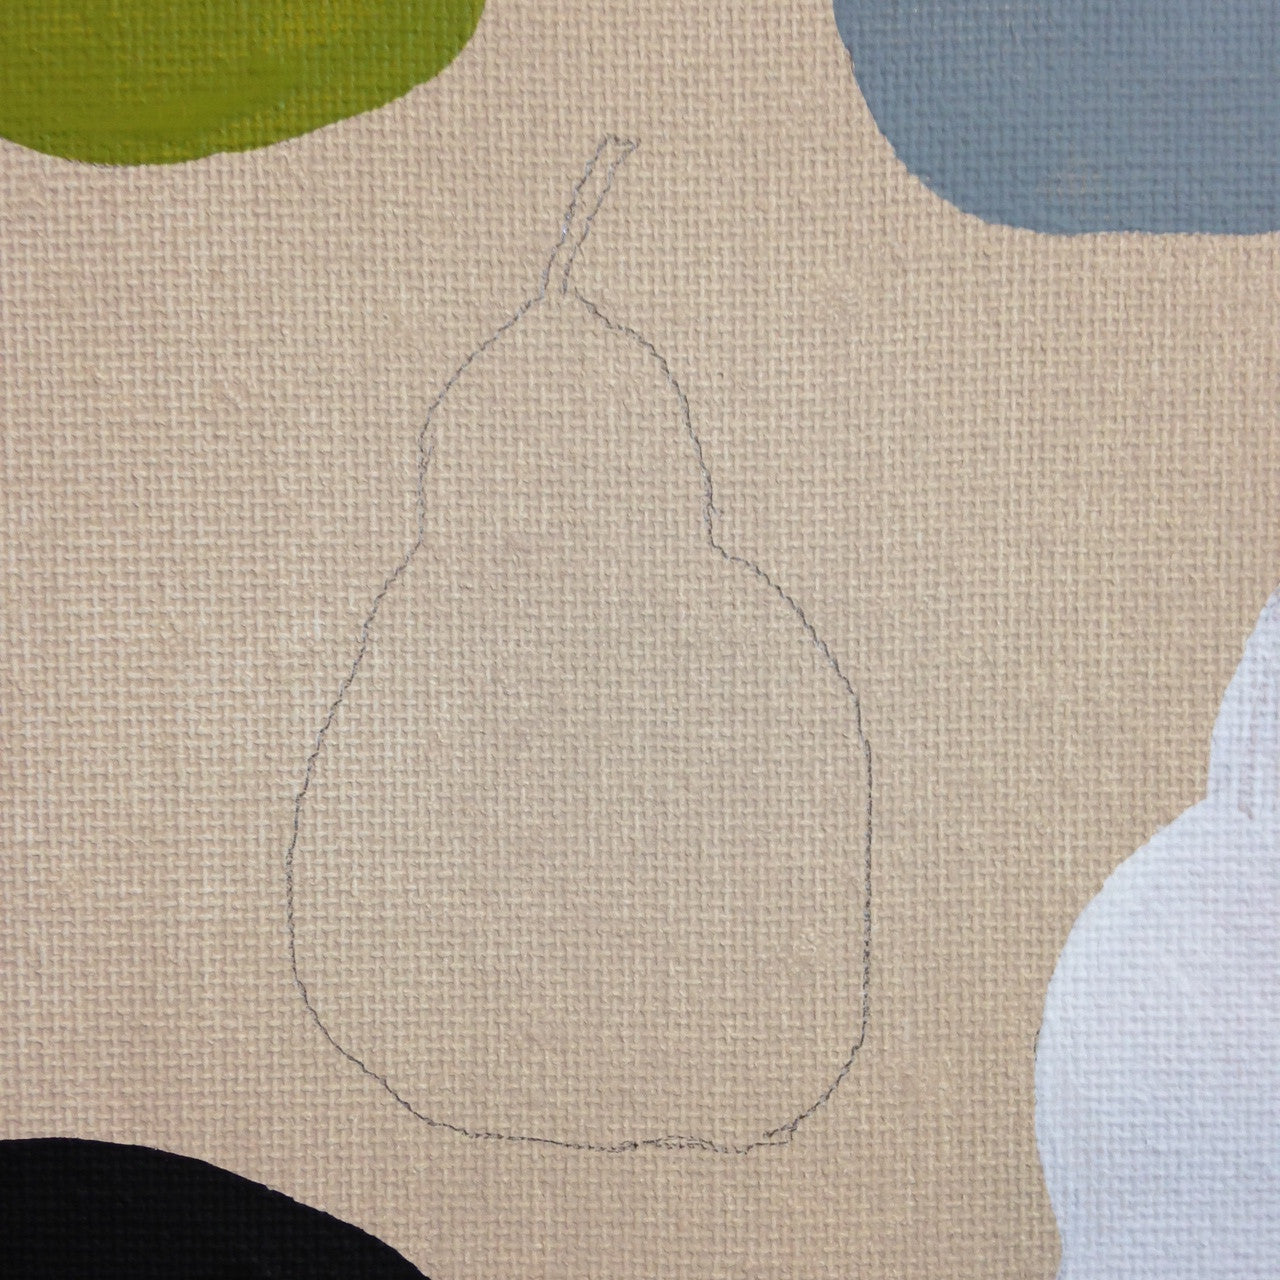 Day 93- Pears with Green Note- Tribute to William Scott